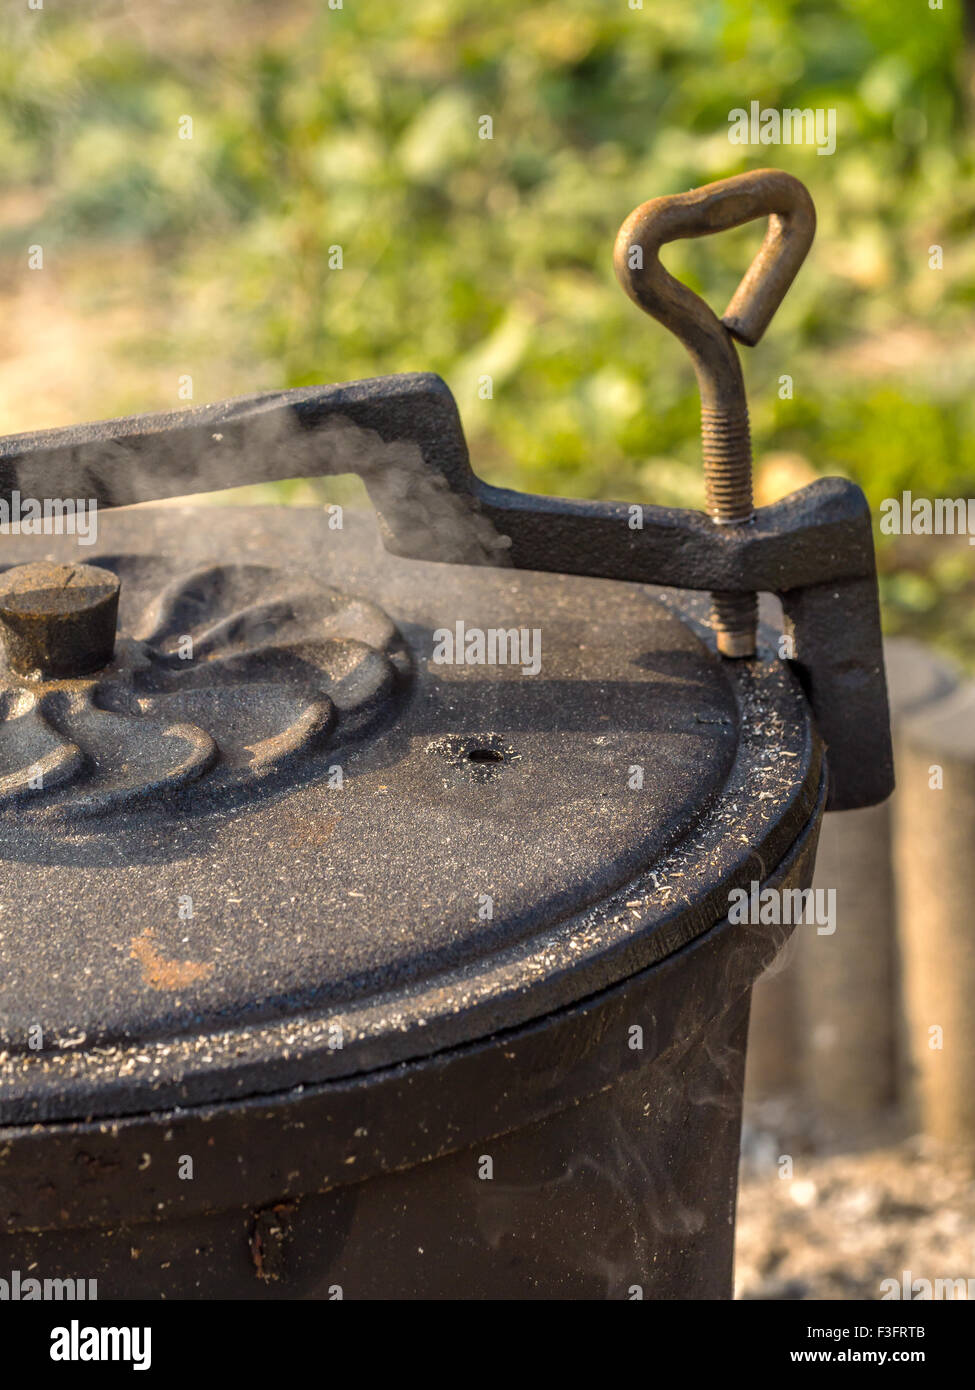 Black cast-iron kettle placed on fire Stock Photo